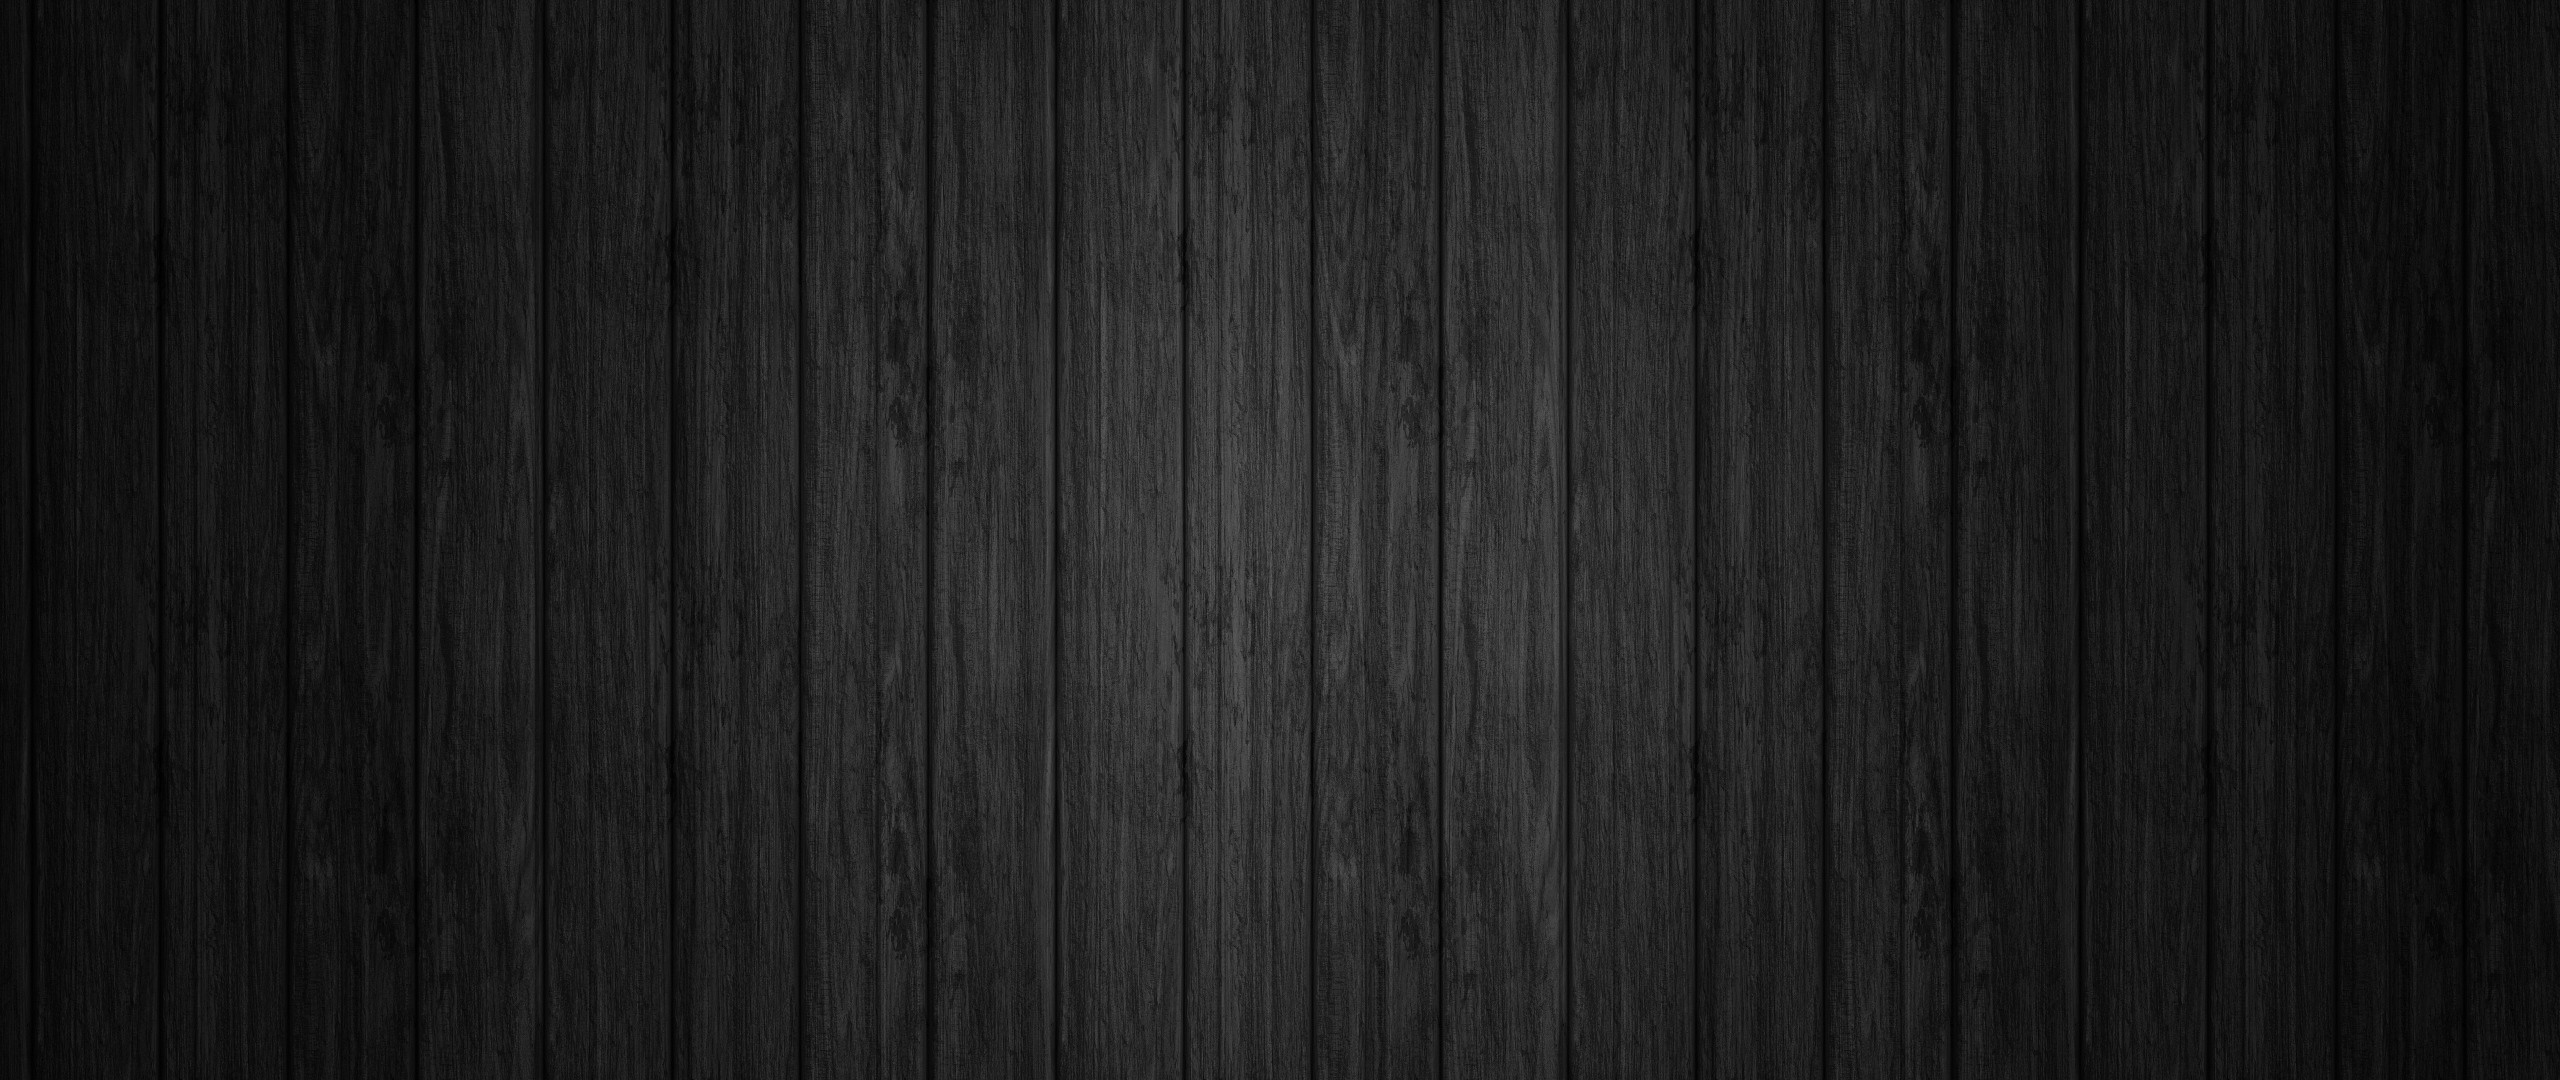 General 2560x1080 wood pattern minimalism simple background wooden surface monochrome texture